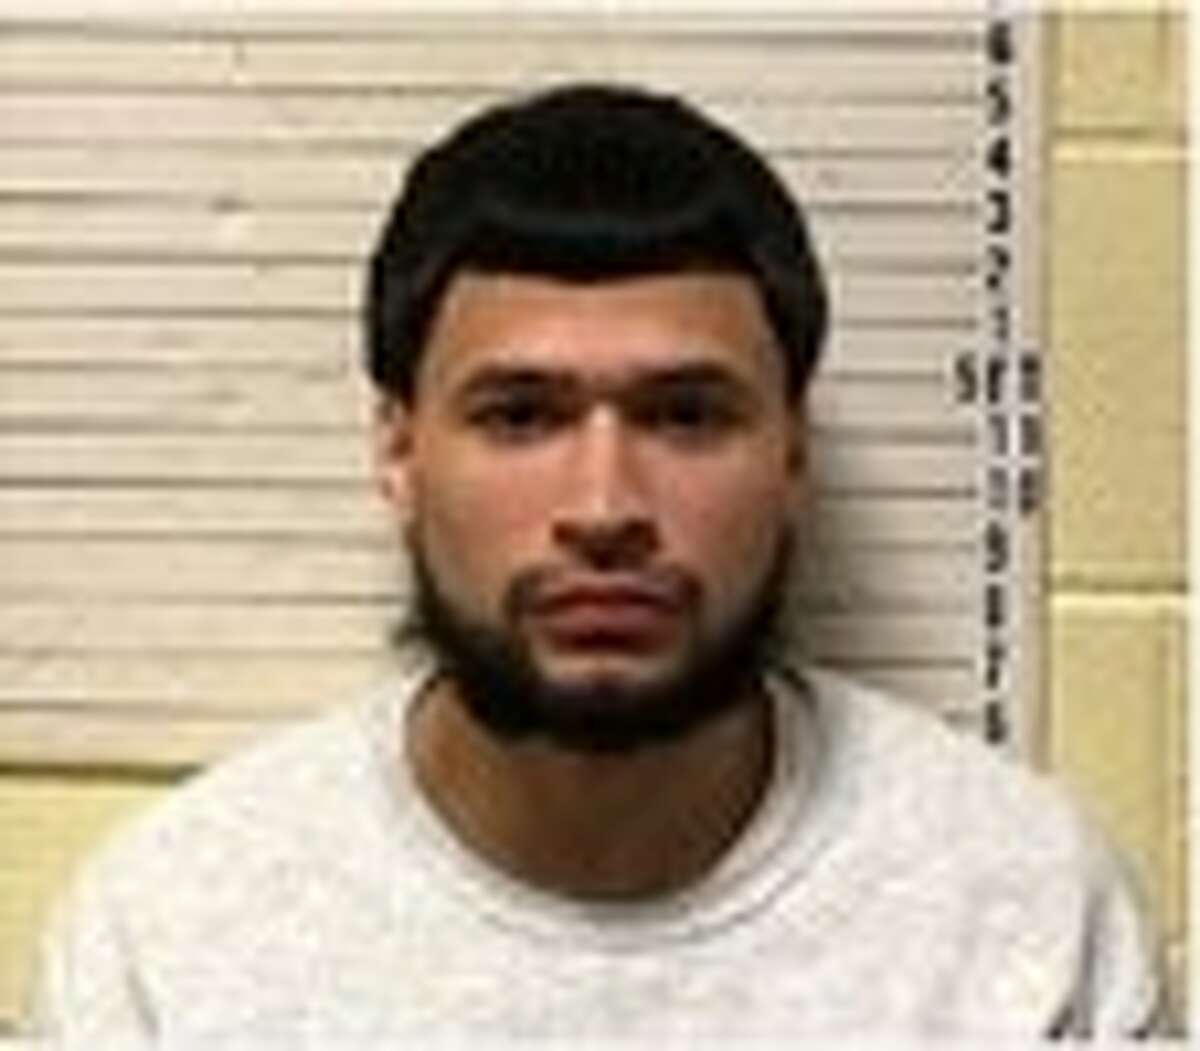 Luis Delvalle, 23, of New Britain, became the sixth member of a crime ring that stole ATMs in Connecticut and surrounding states to be arrested when he was taken into custody Wednesday, according to Middletown police.